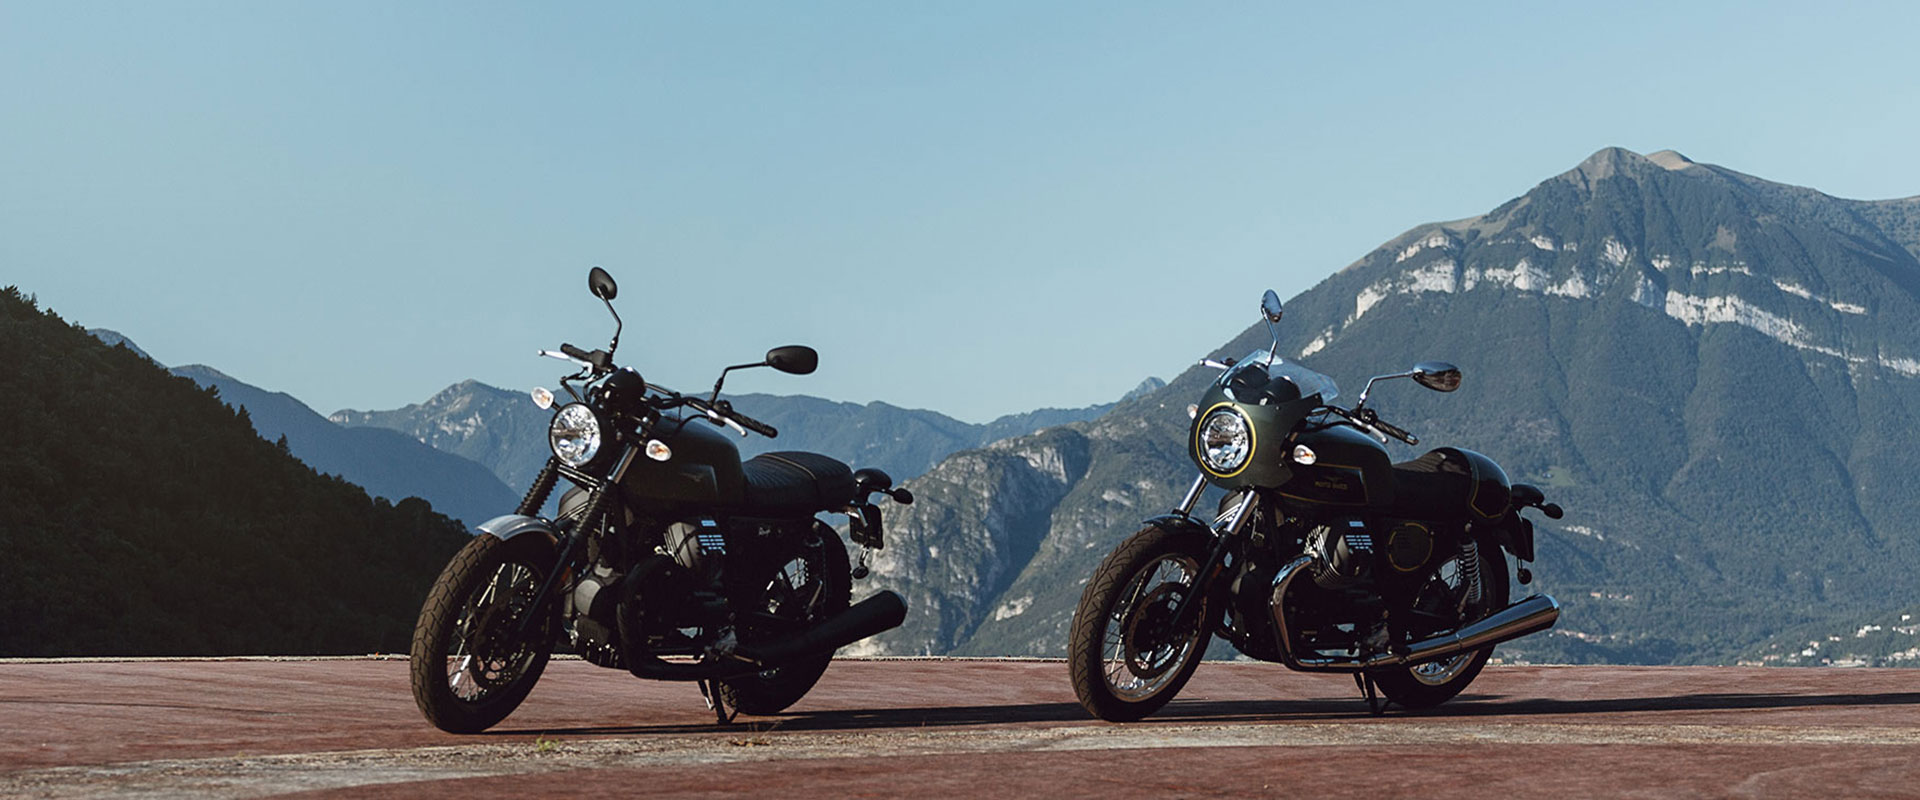 Two Moto Guzzi V7 III motorcycles parked on flats with mountains in background